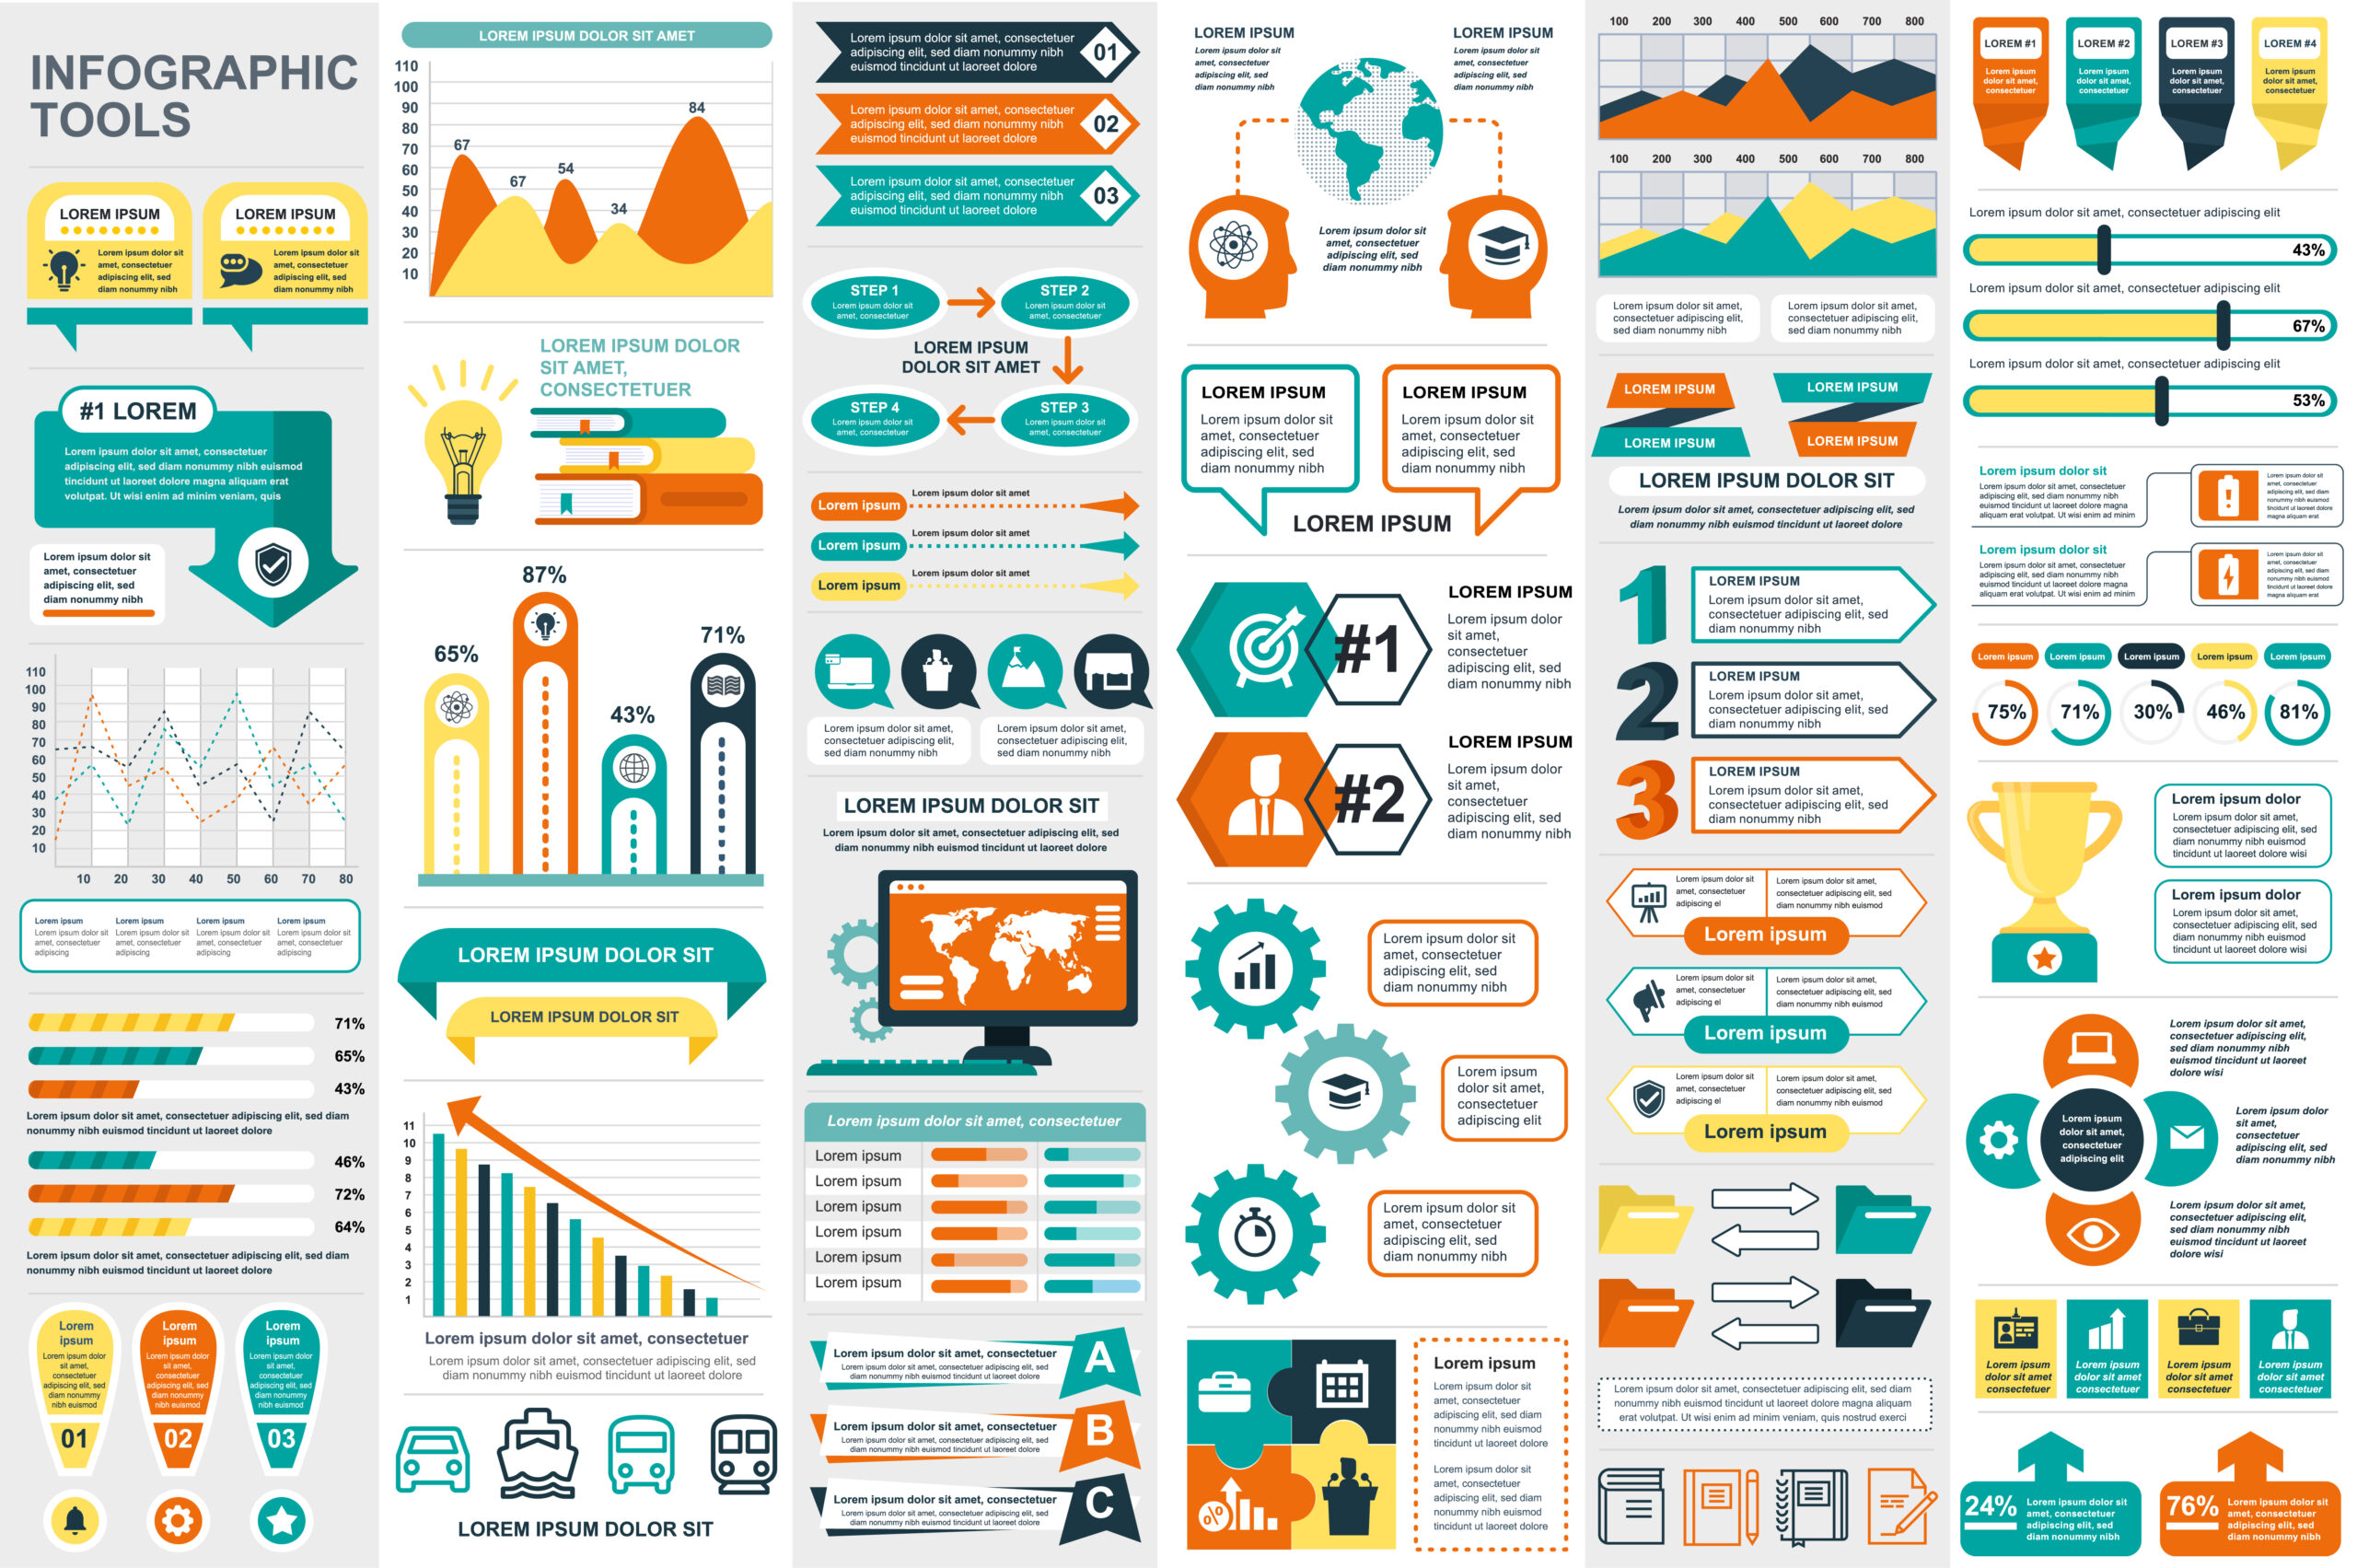 Infographic Elements Stock Illustration - Download Image Now - iStock